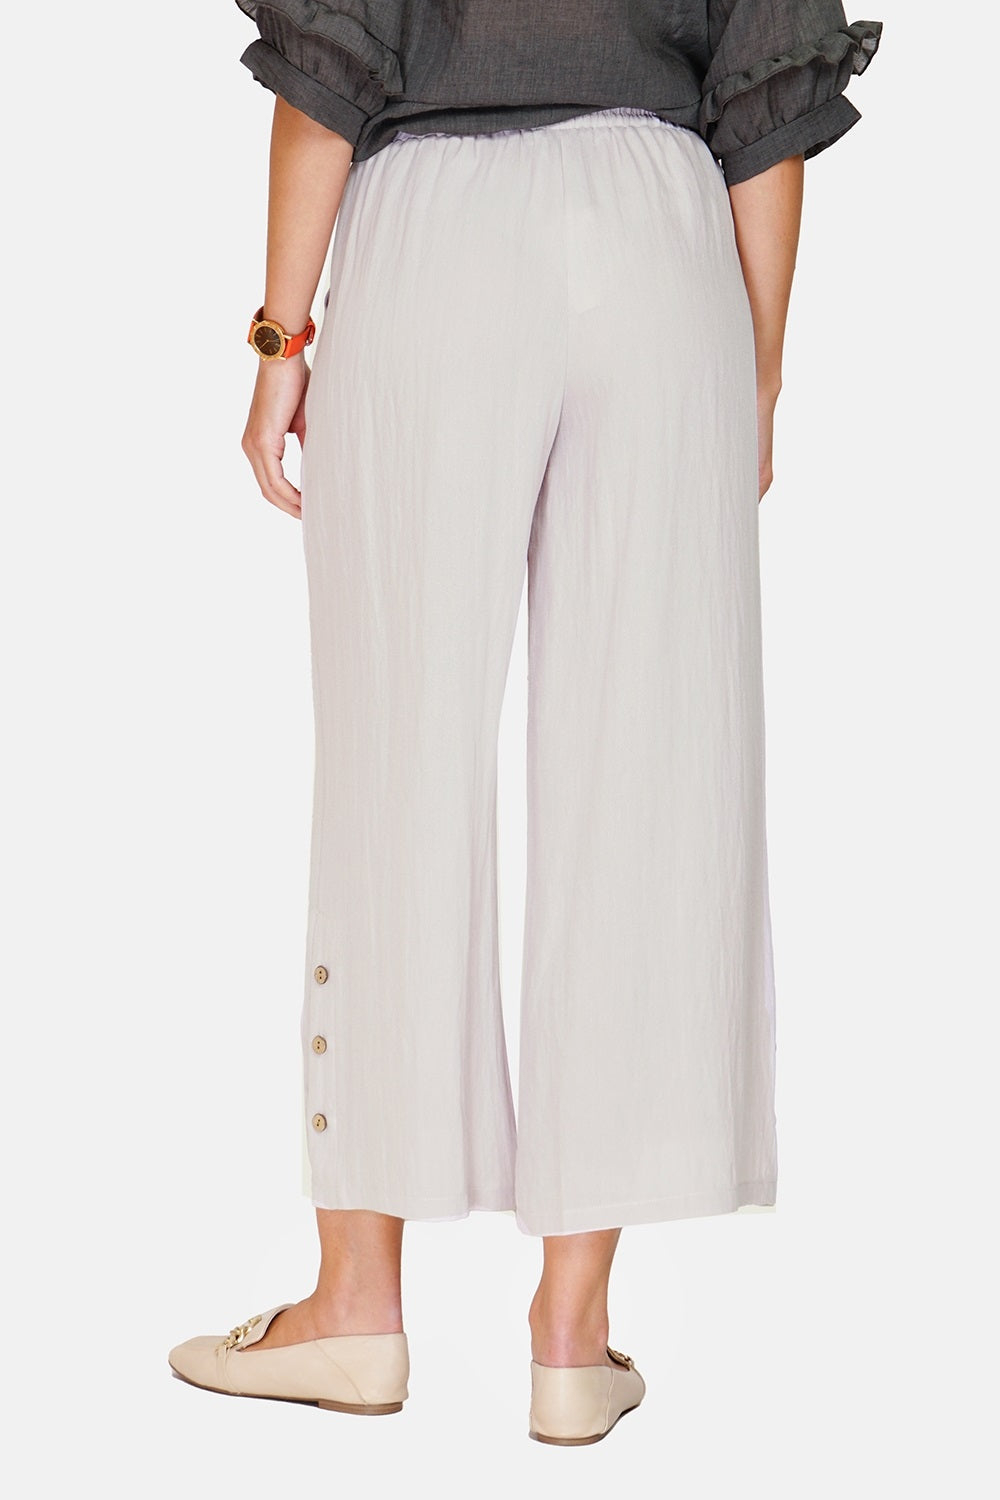 Wide pants with pockets on the sides, high waist, drawstring, batonnage bottom